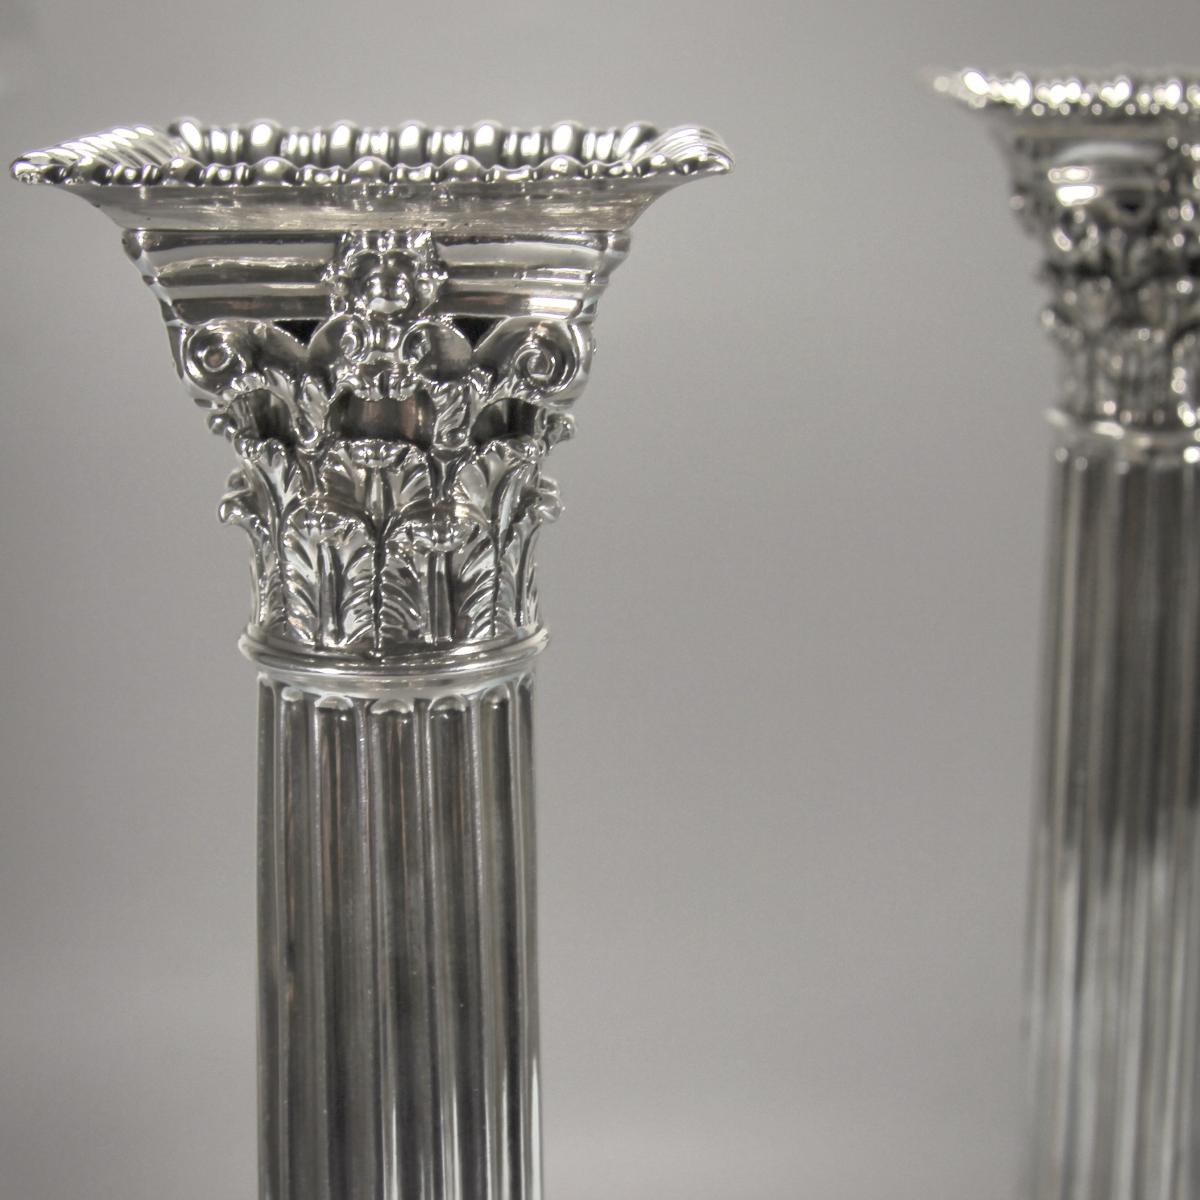 GEORGE III Pair of  Silver Tall  Corinthian filled Candlesticks by Ebeneze Coker. London 1761.